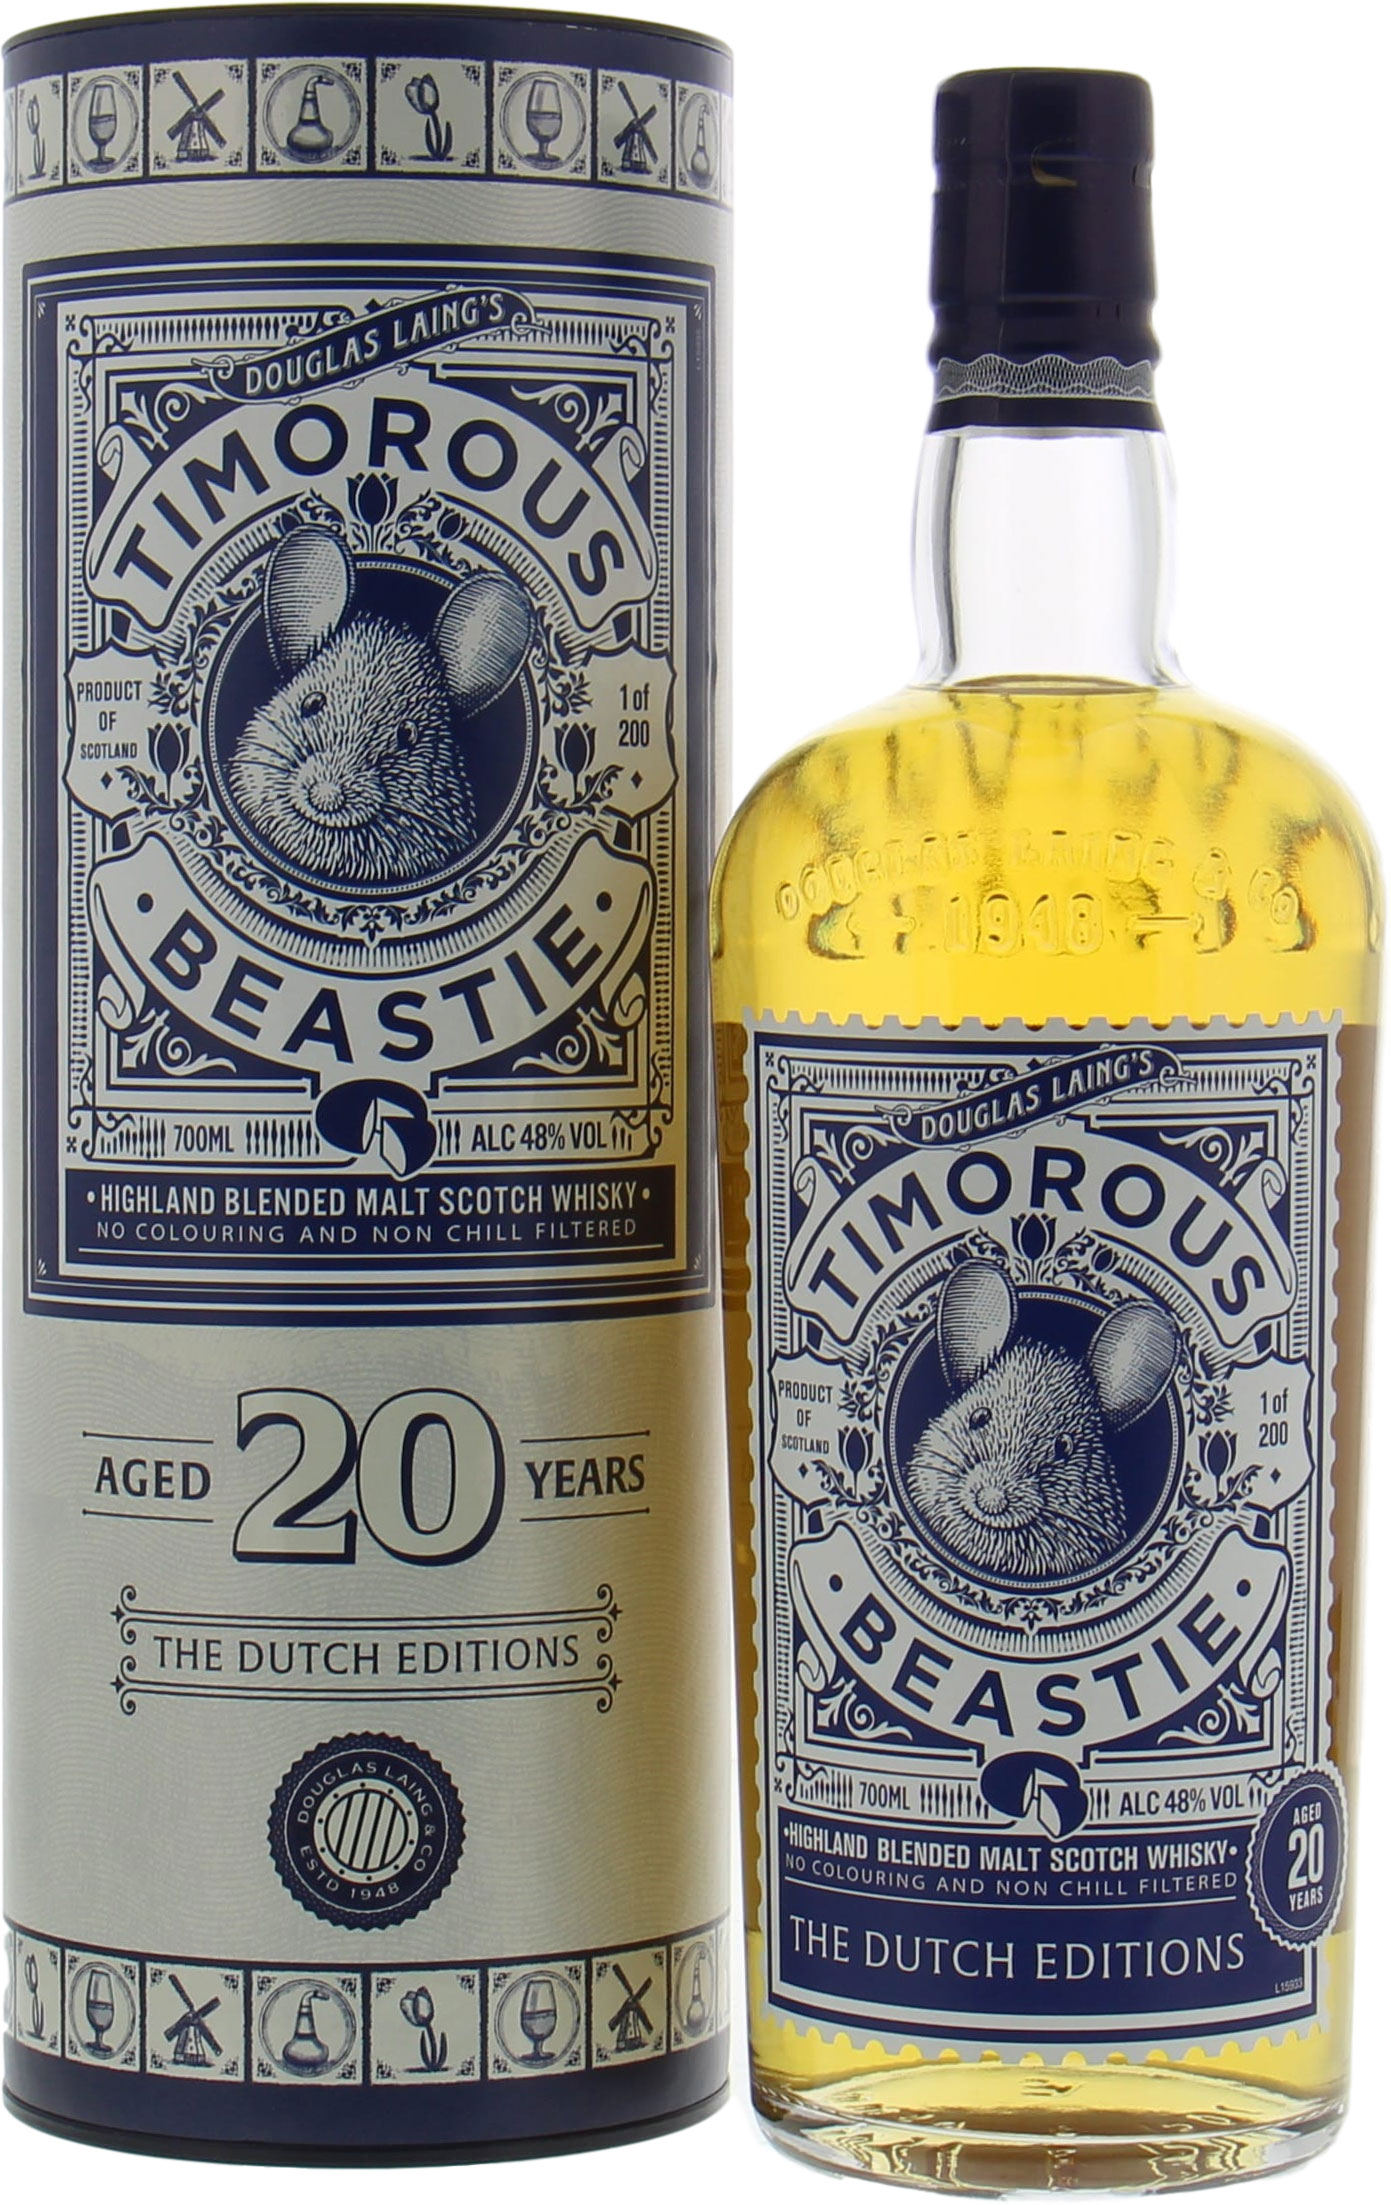 Douglas Laing - Timorous Beastie 20 Years Old The Dutch Editions 48% NV In Original Container